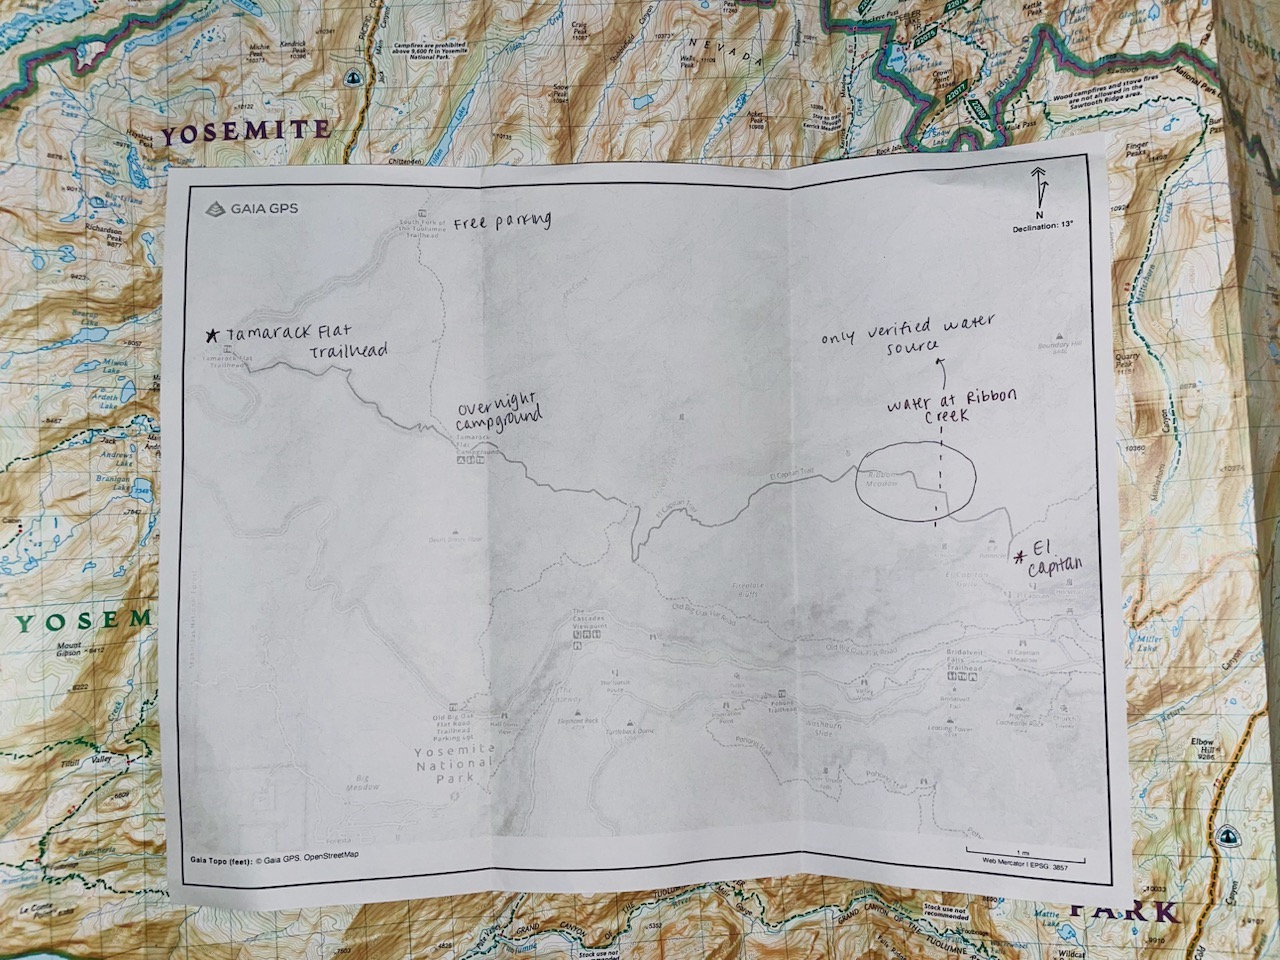 Annotated paper map on top of National Geographic map